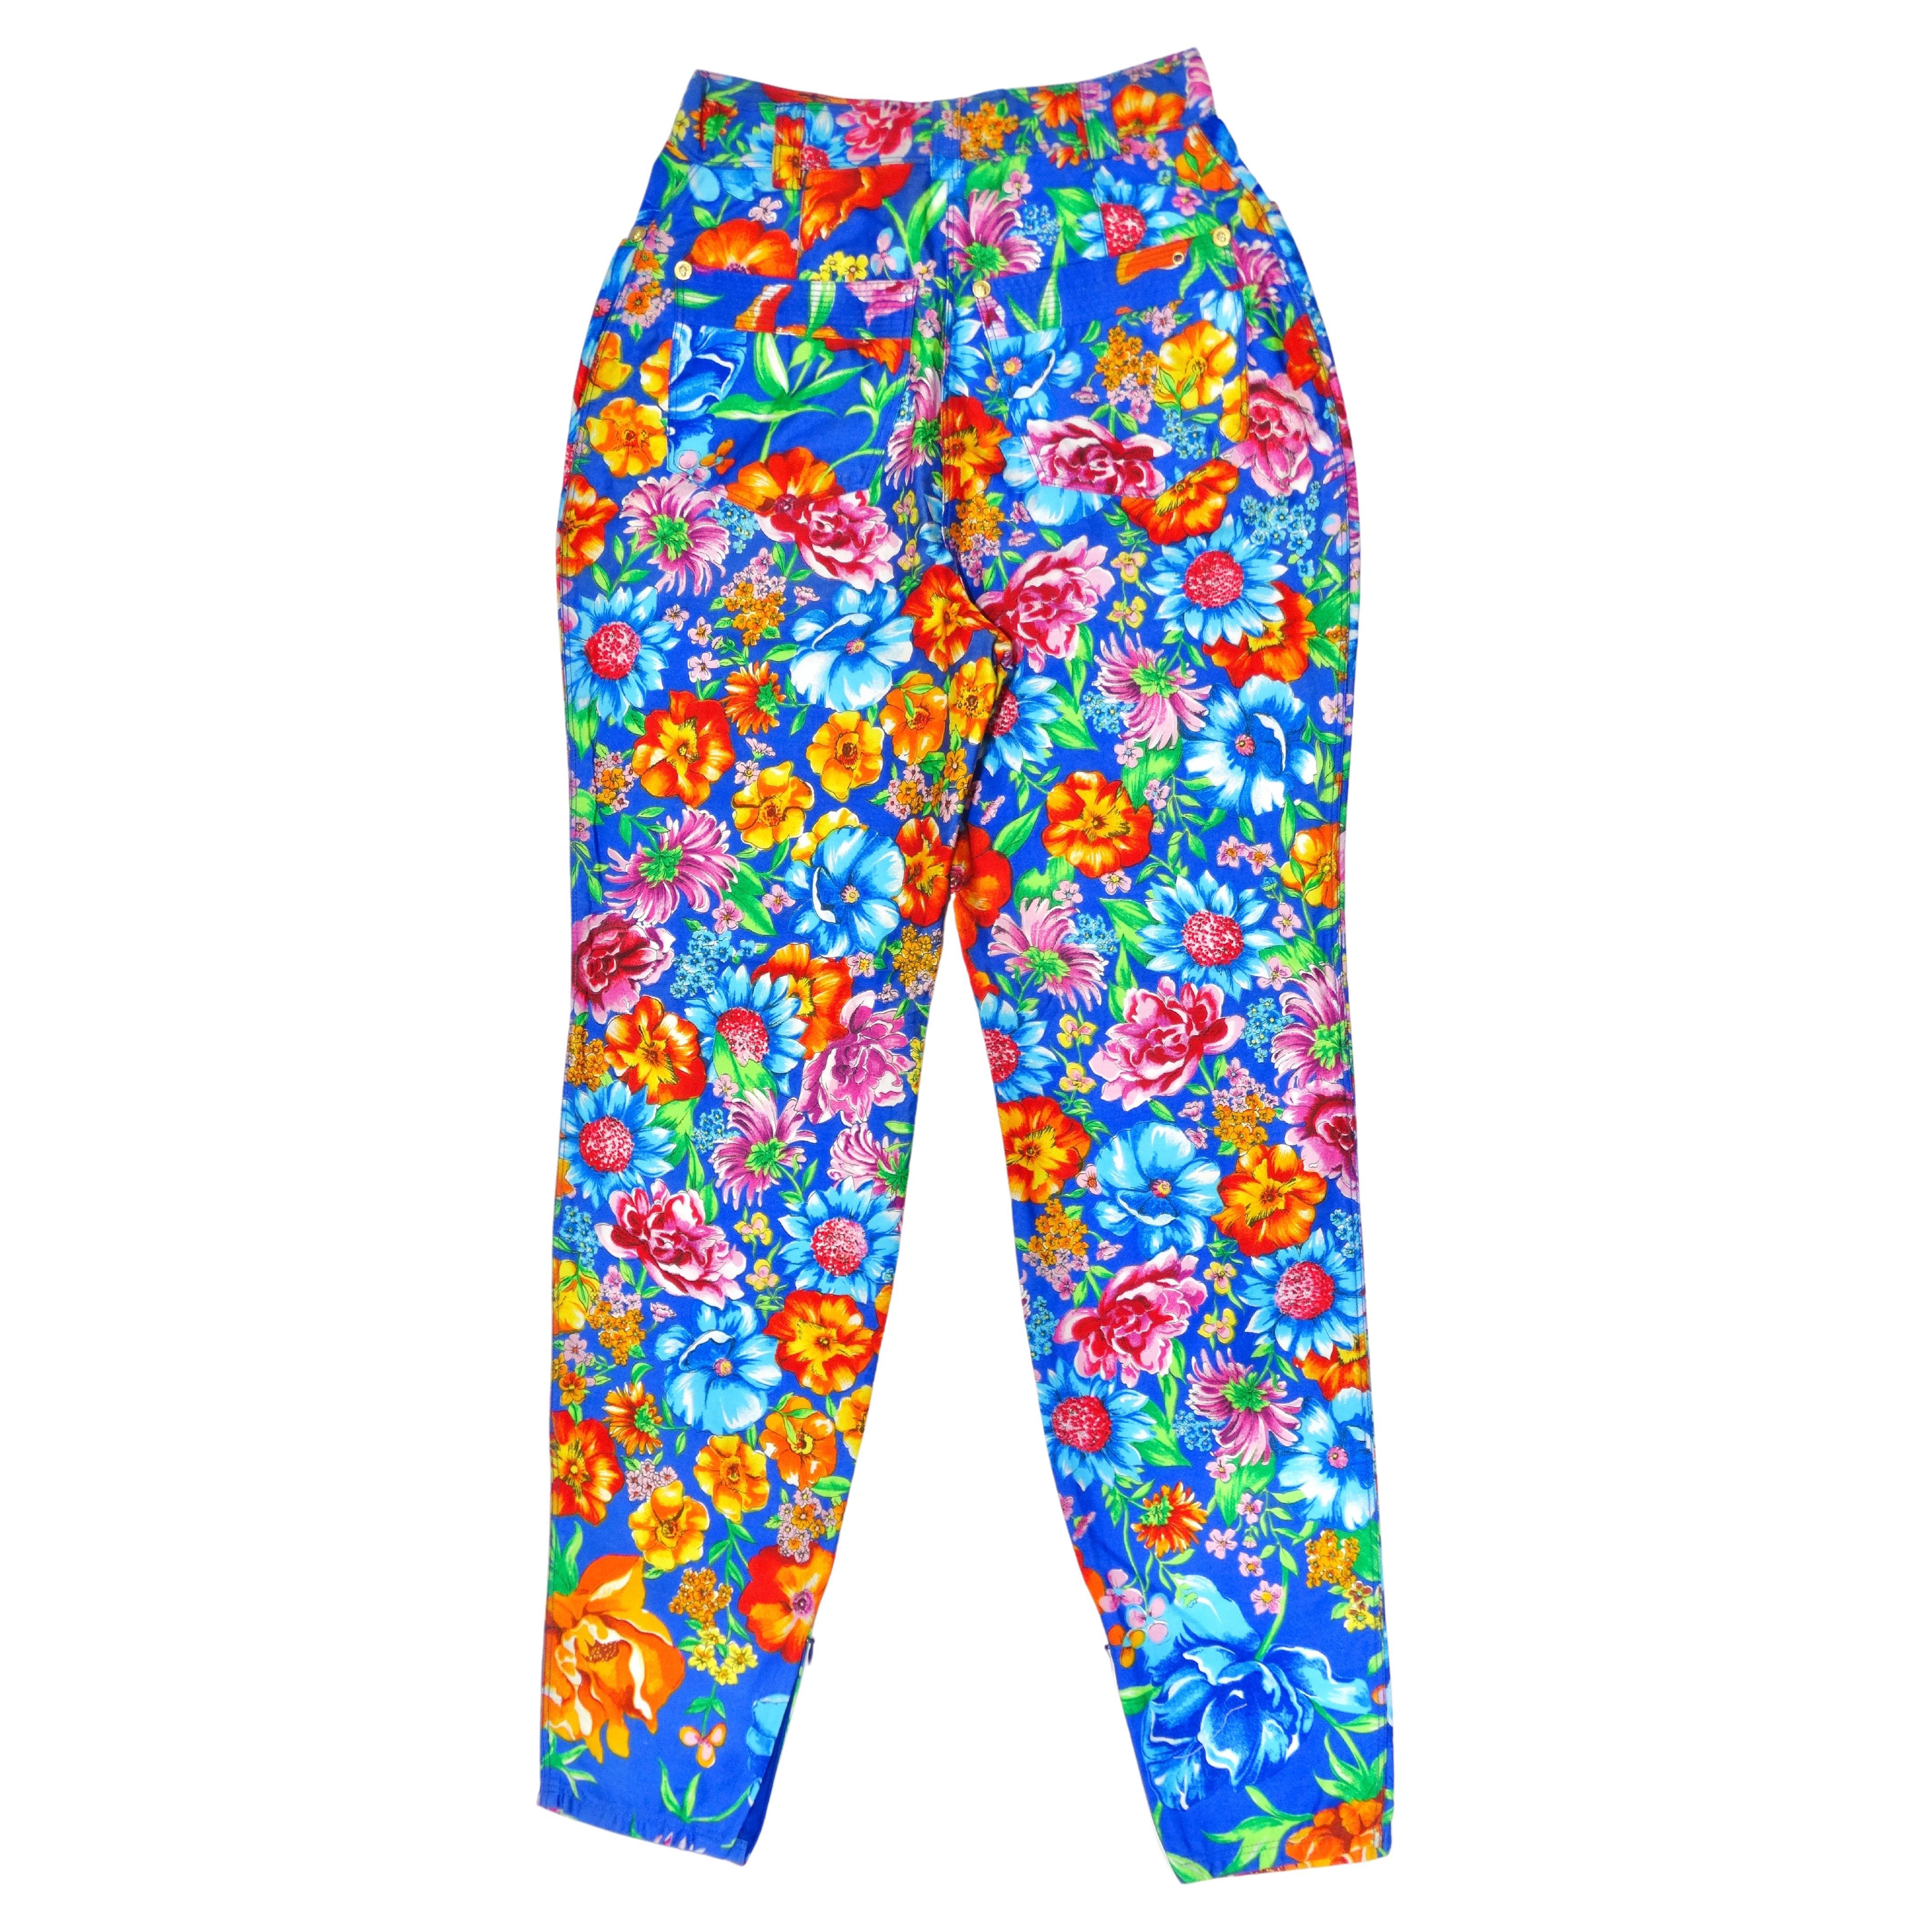 Feel pretty in Versace! These floral printed multi-colored jeans will make you feel flirty and feminine in one easy step. These feature a zipped leg, slight balloon shape, ultra high rise, and a vibrant floral pattern in blue, pink, green, orange,